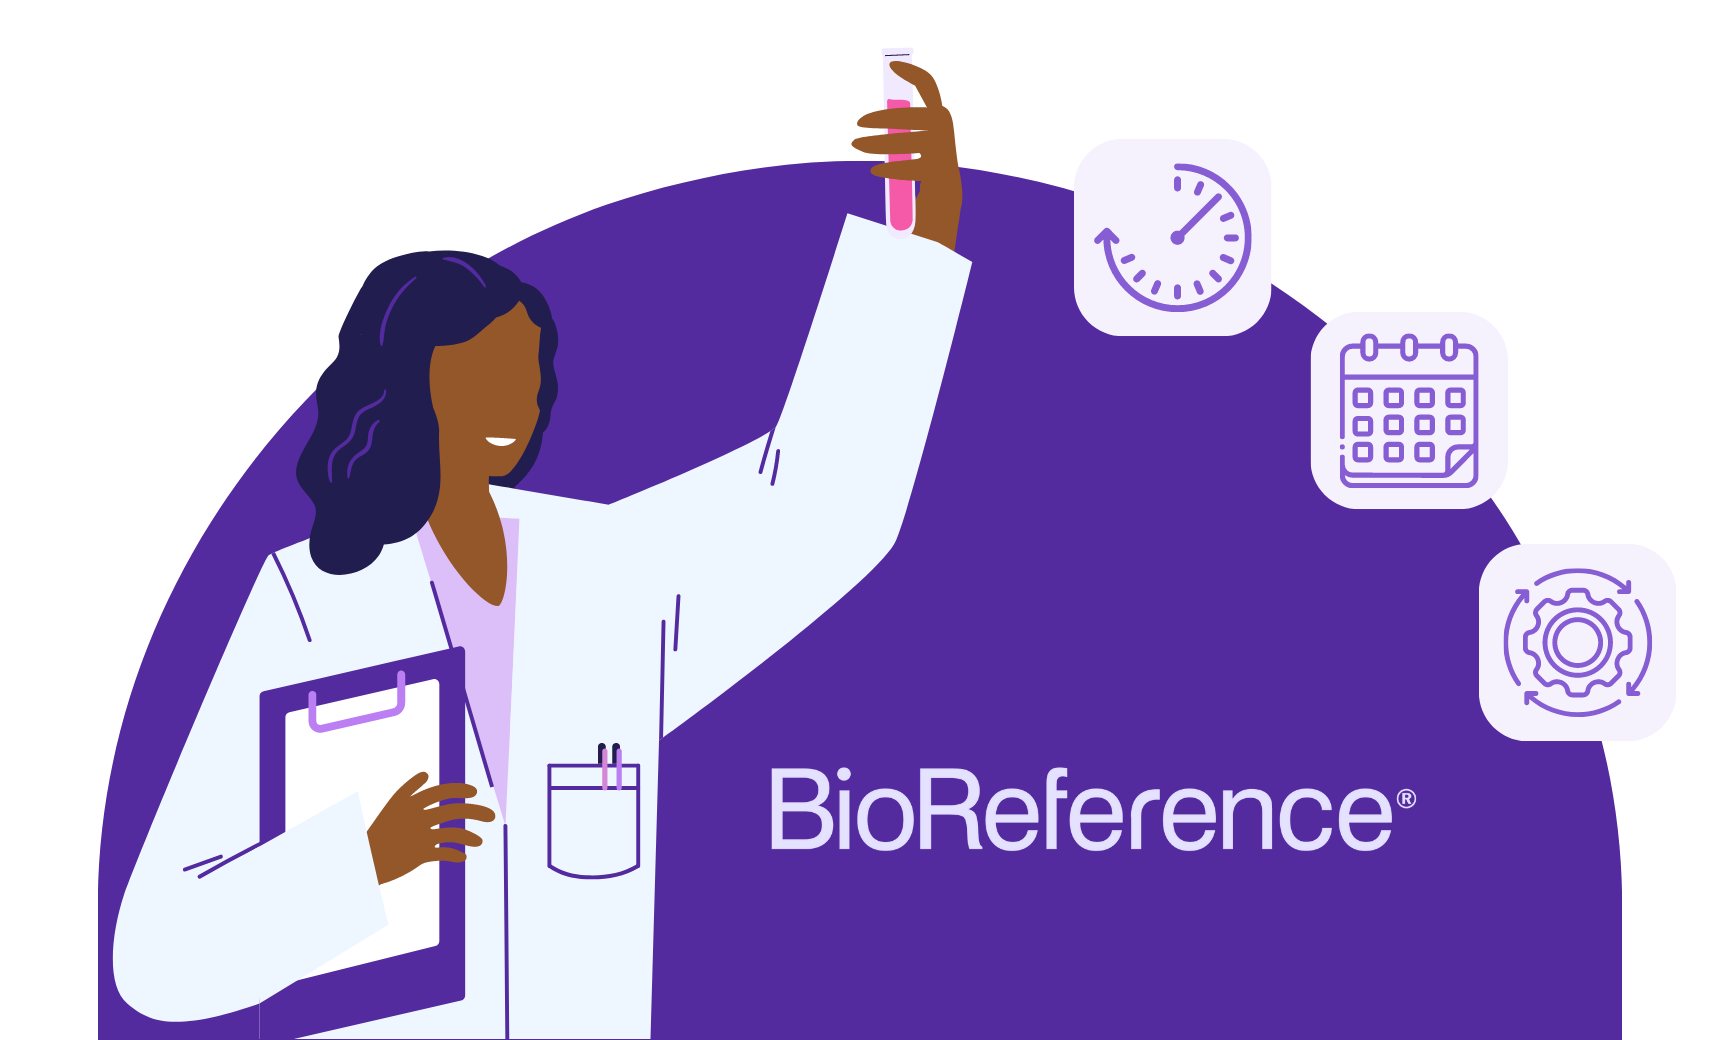 Powering Healthcare Excellence: BioReference and LabFinder Drive Digital Health Transformation